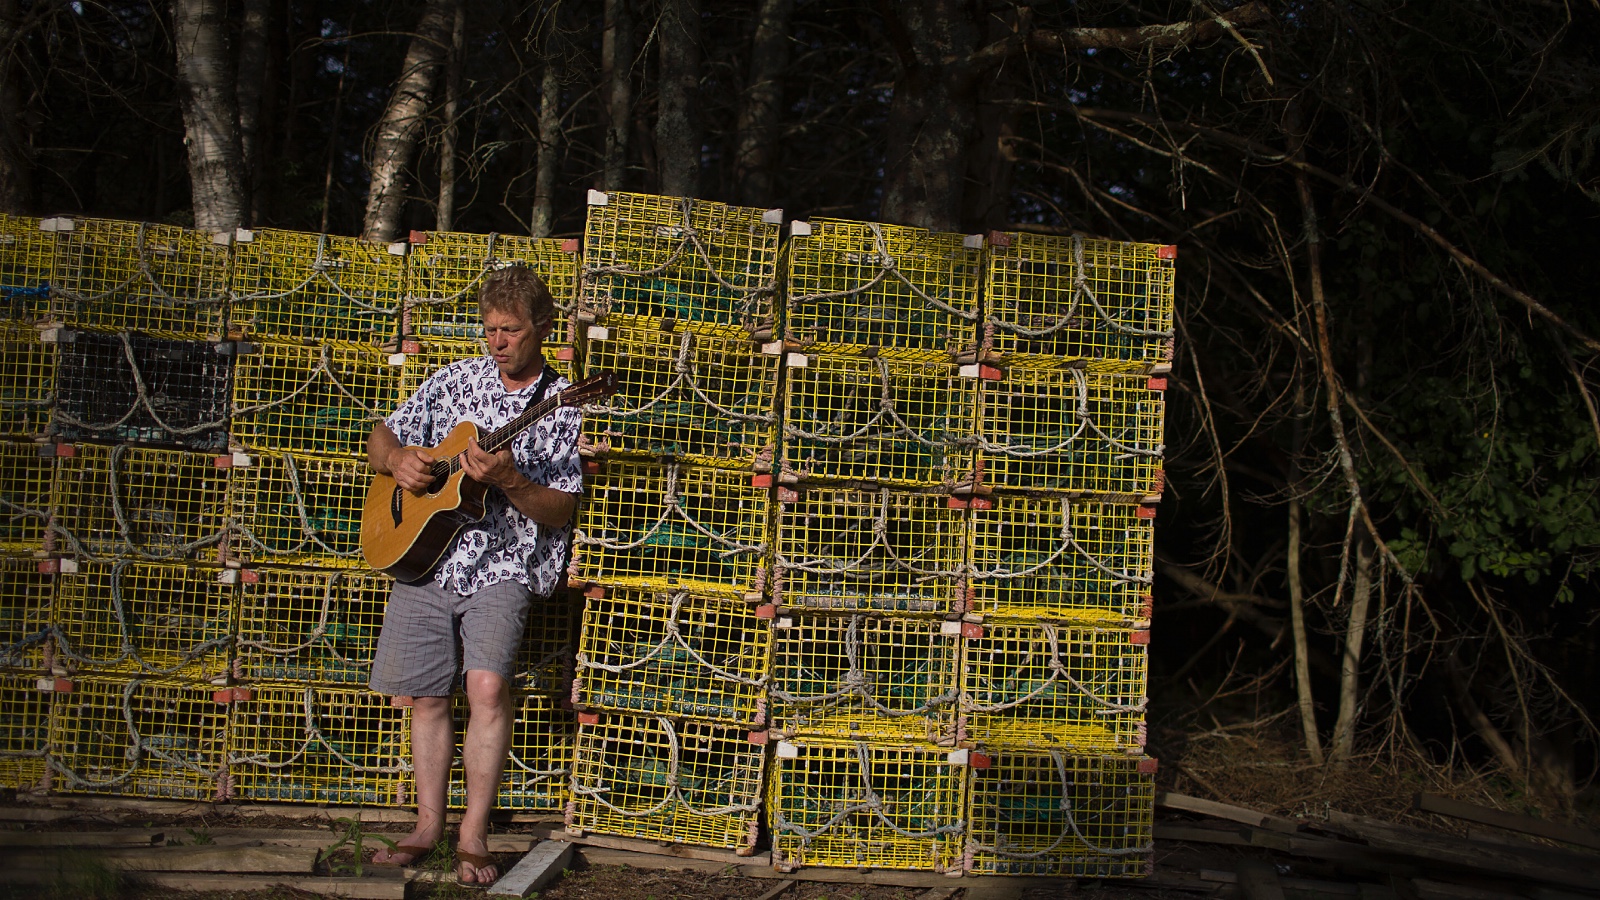 A Maine lobsterman plays guitar in front of rows of stacked lobster traps.